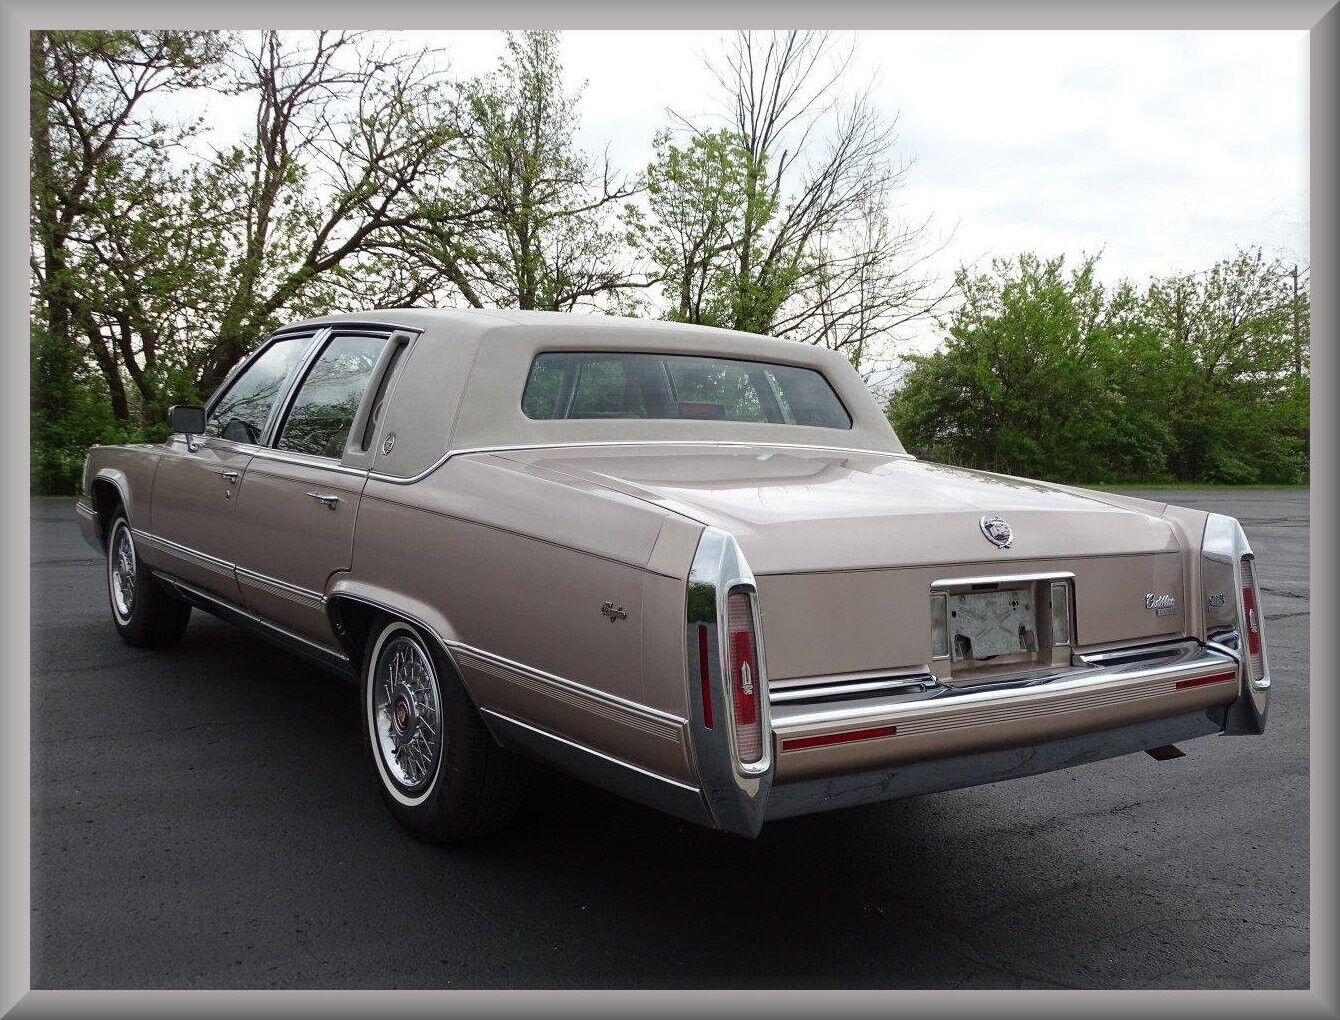 1992 Cadillac Brougham, Refrigerator Magnet, 42 MIL Thick